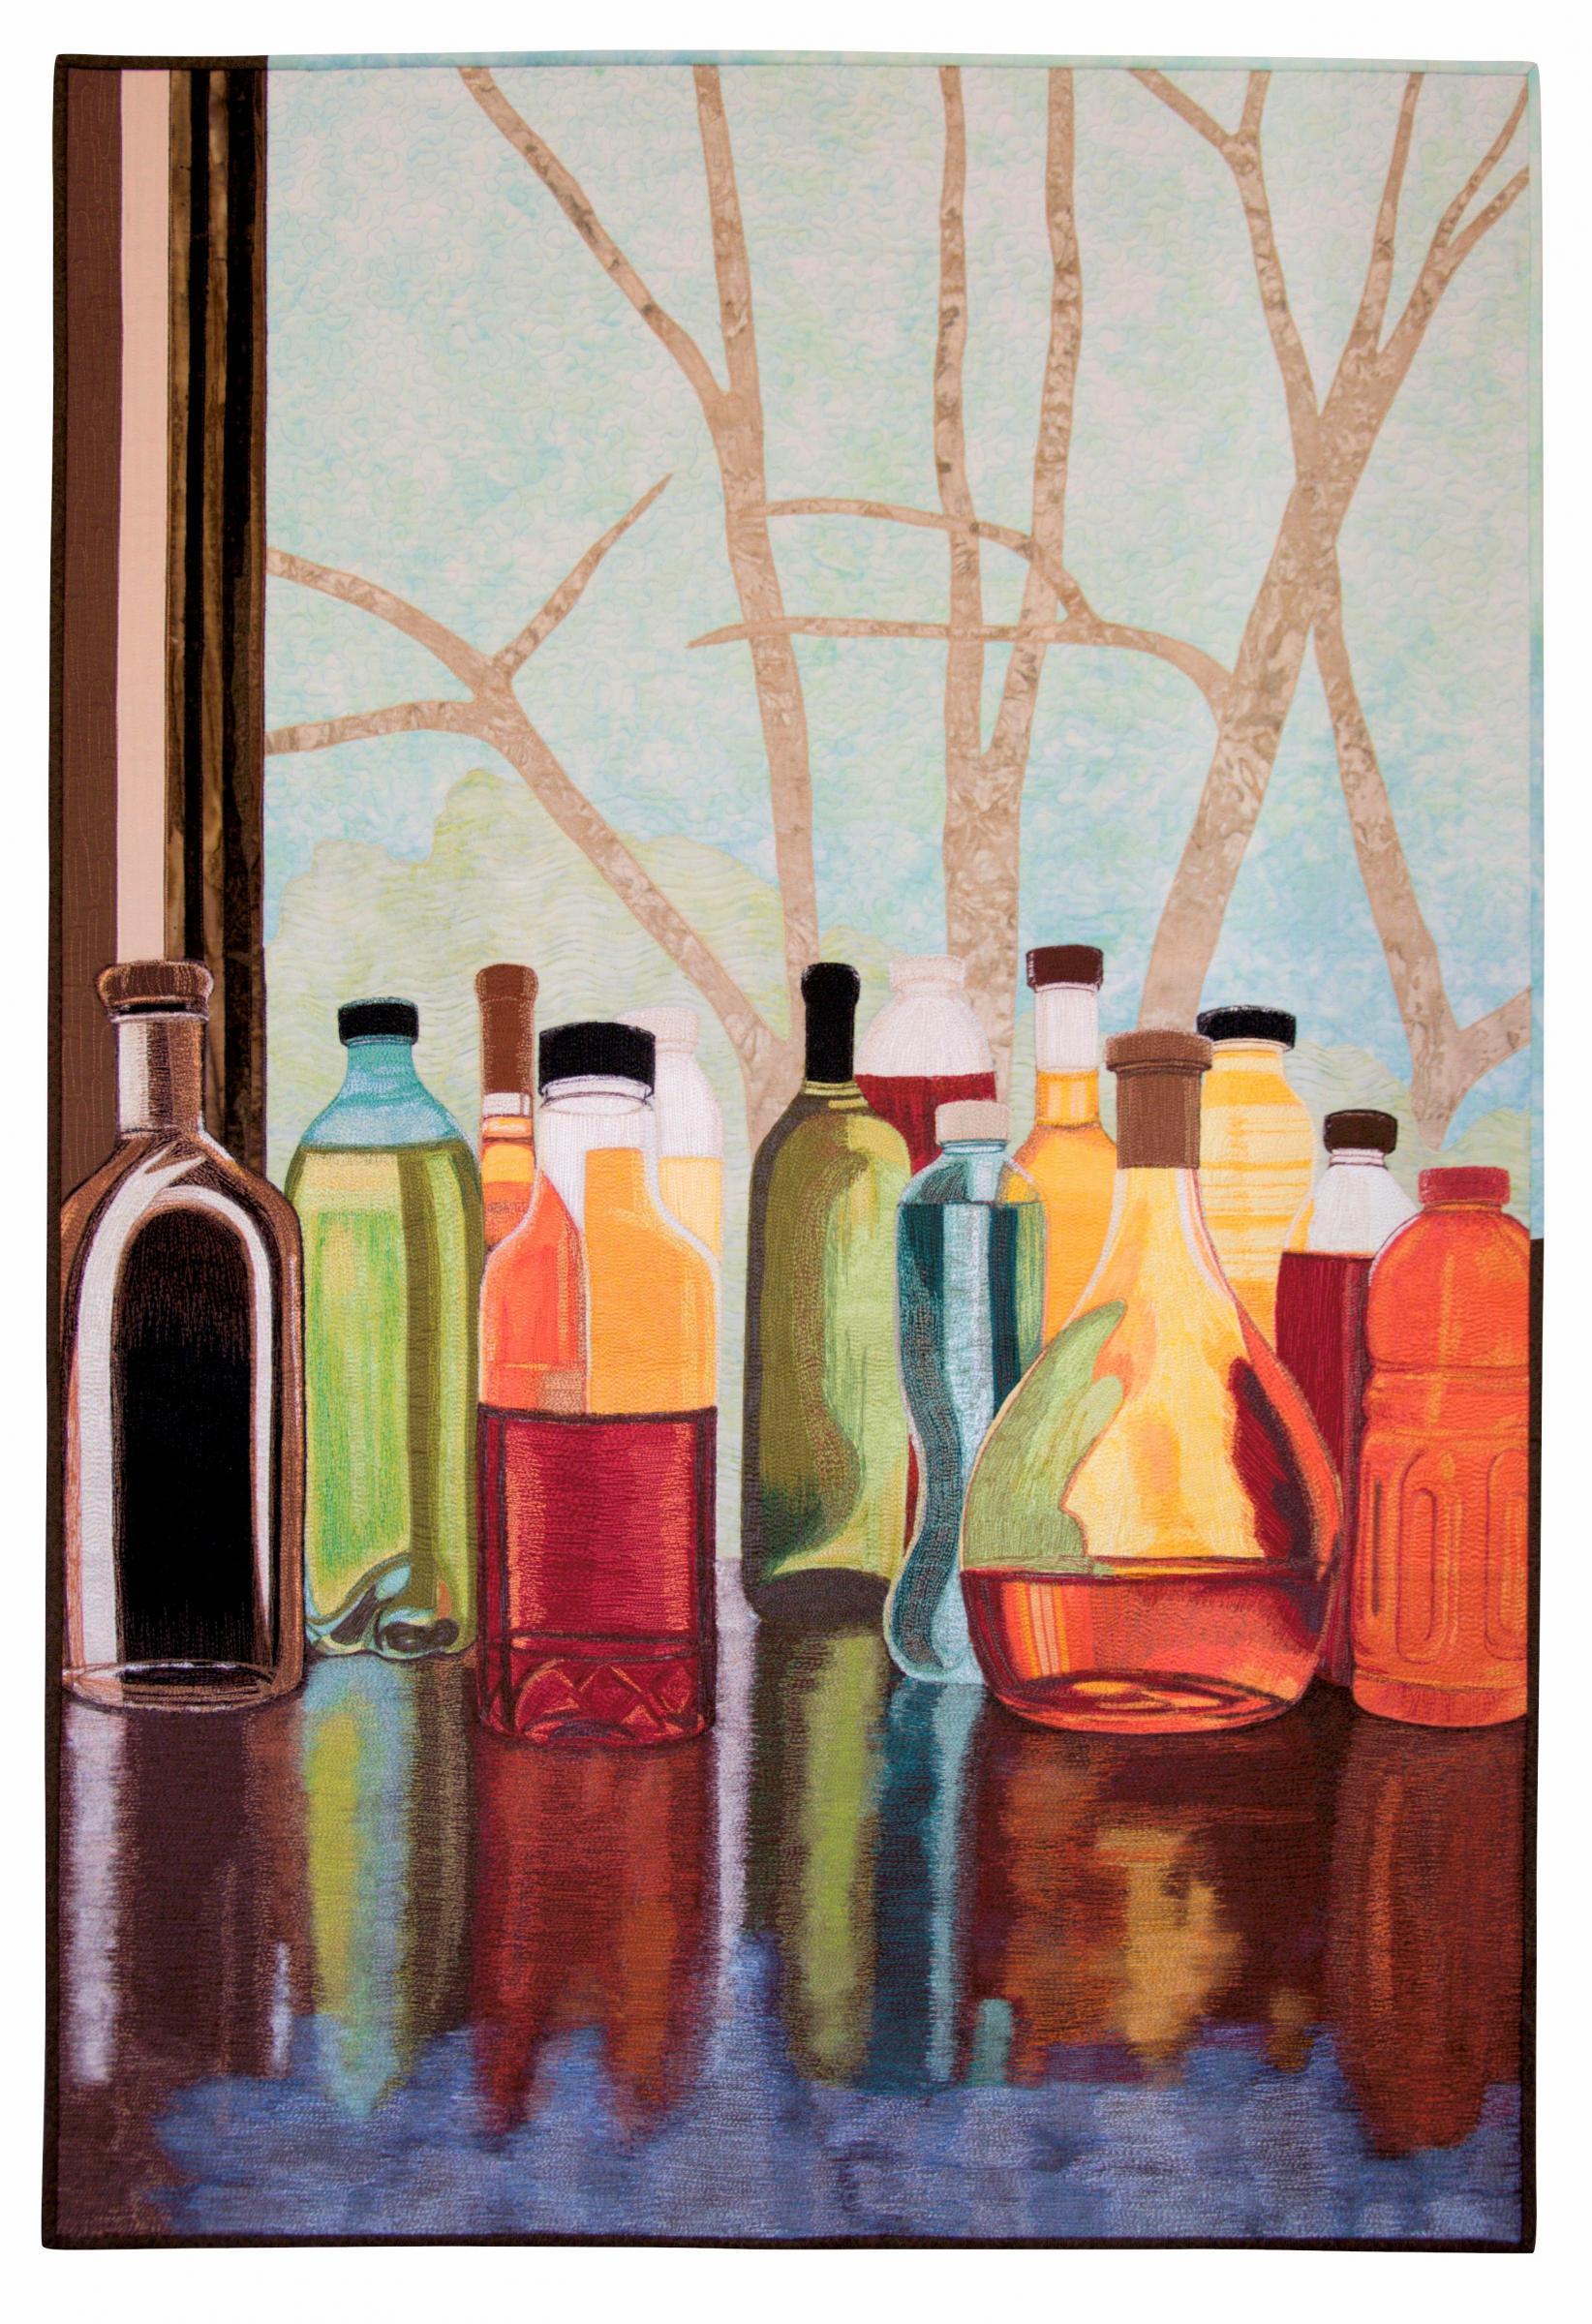 Sara Sharp - Turning Bottles Into "Stained Glass"